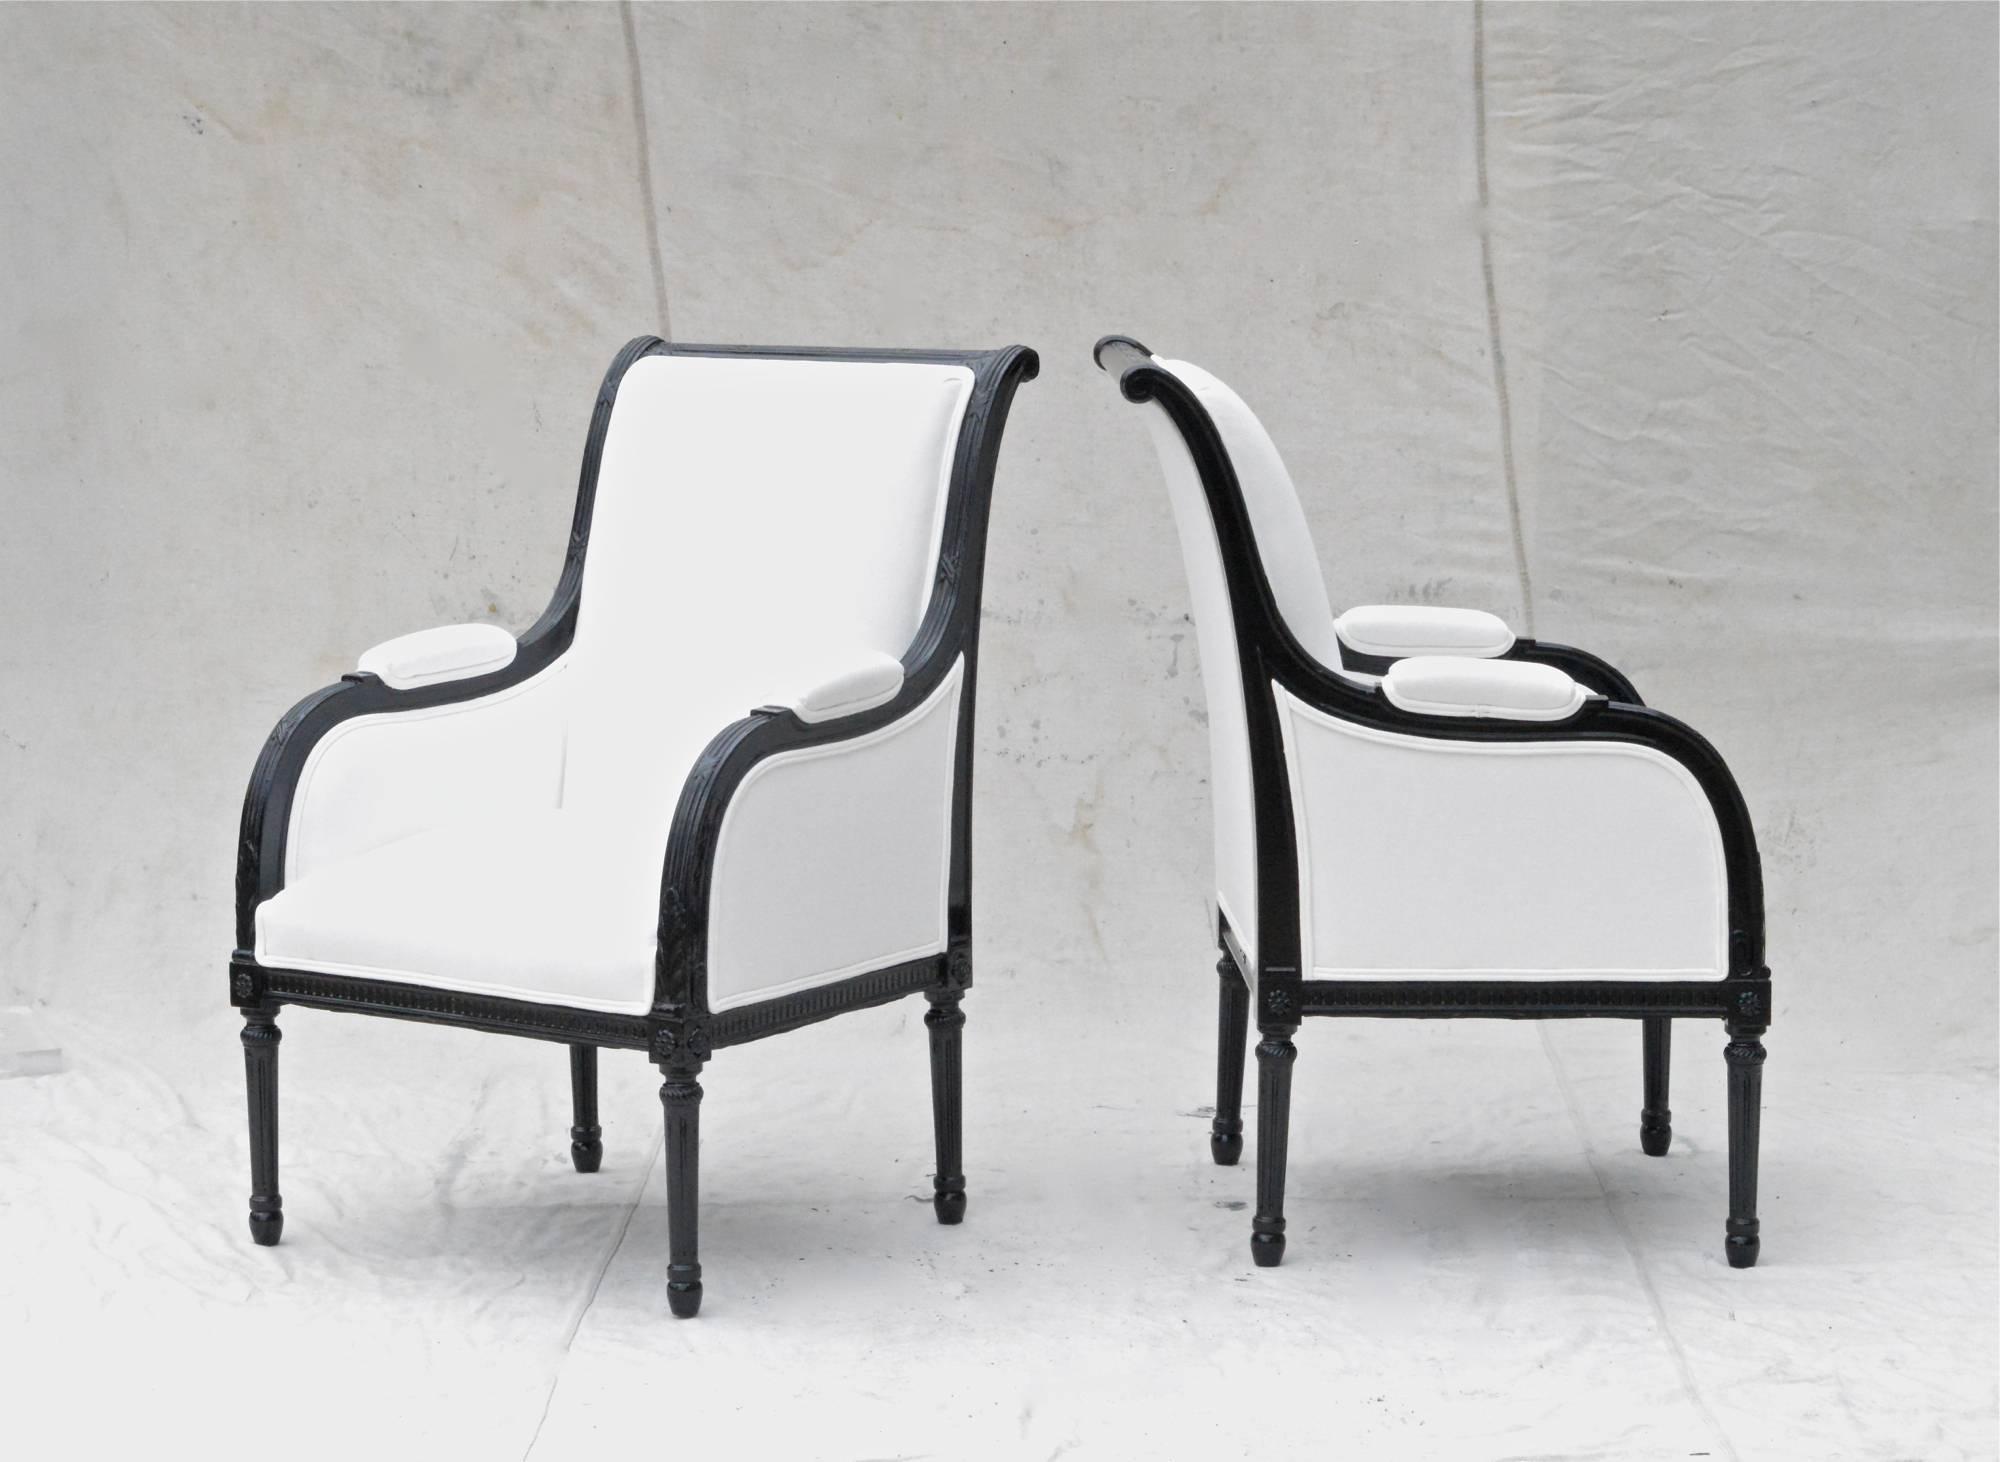 Spanish Directoire Styled Library Chairs in Black and White